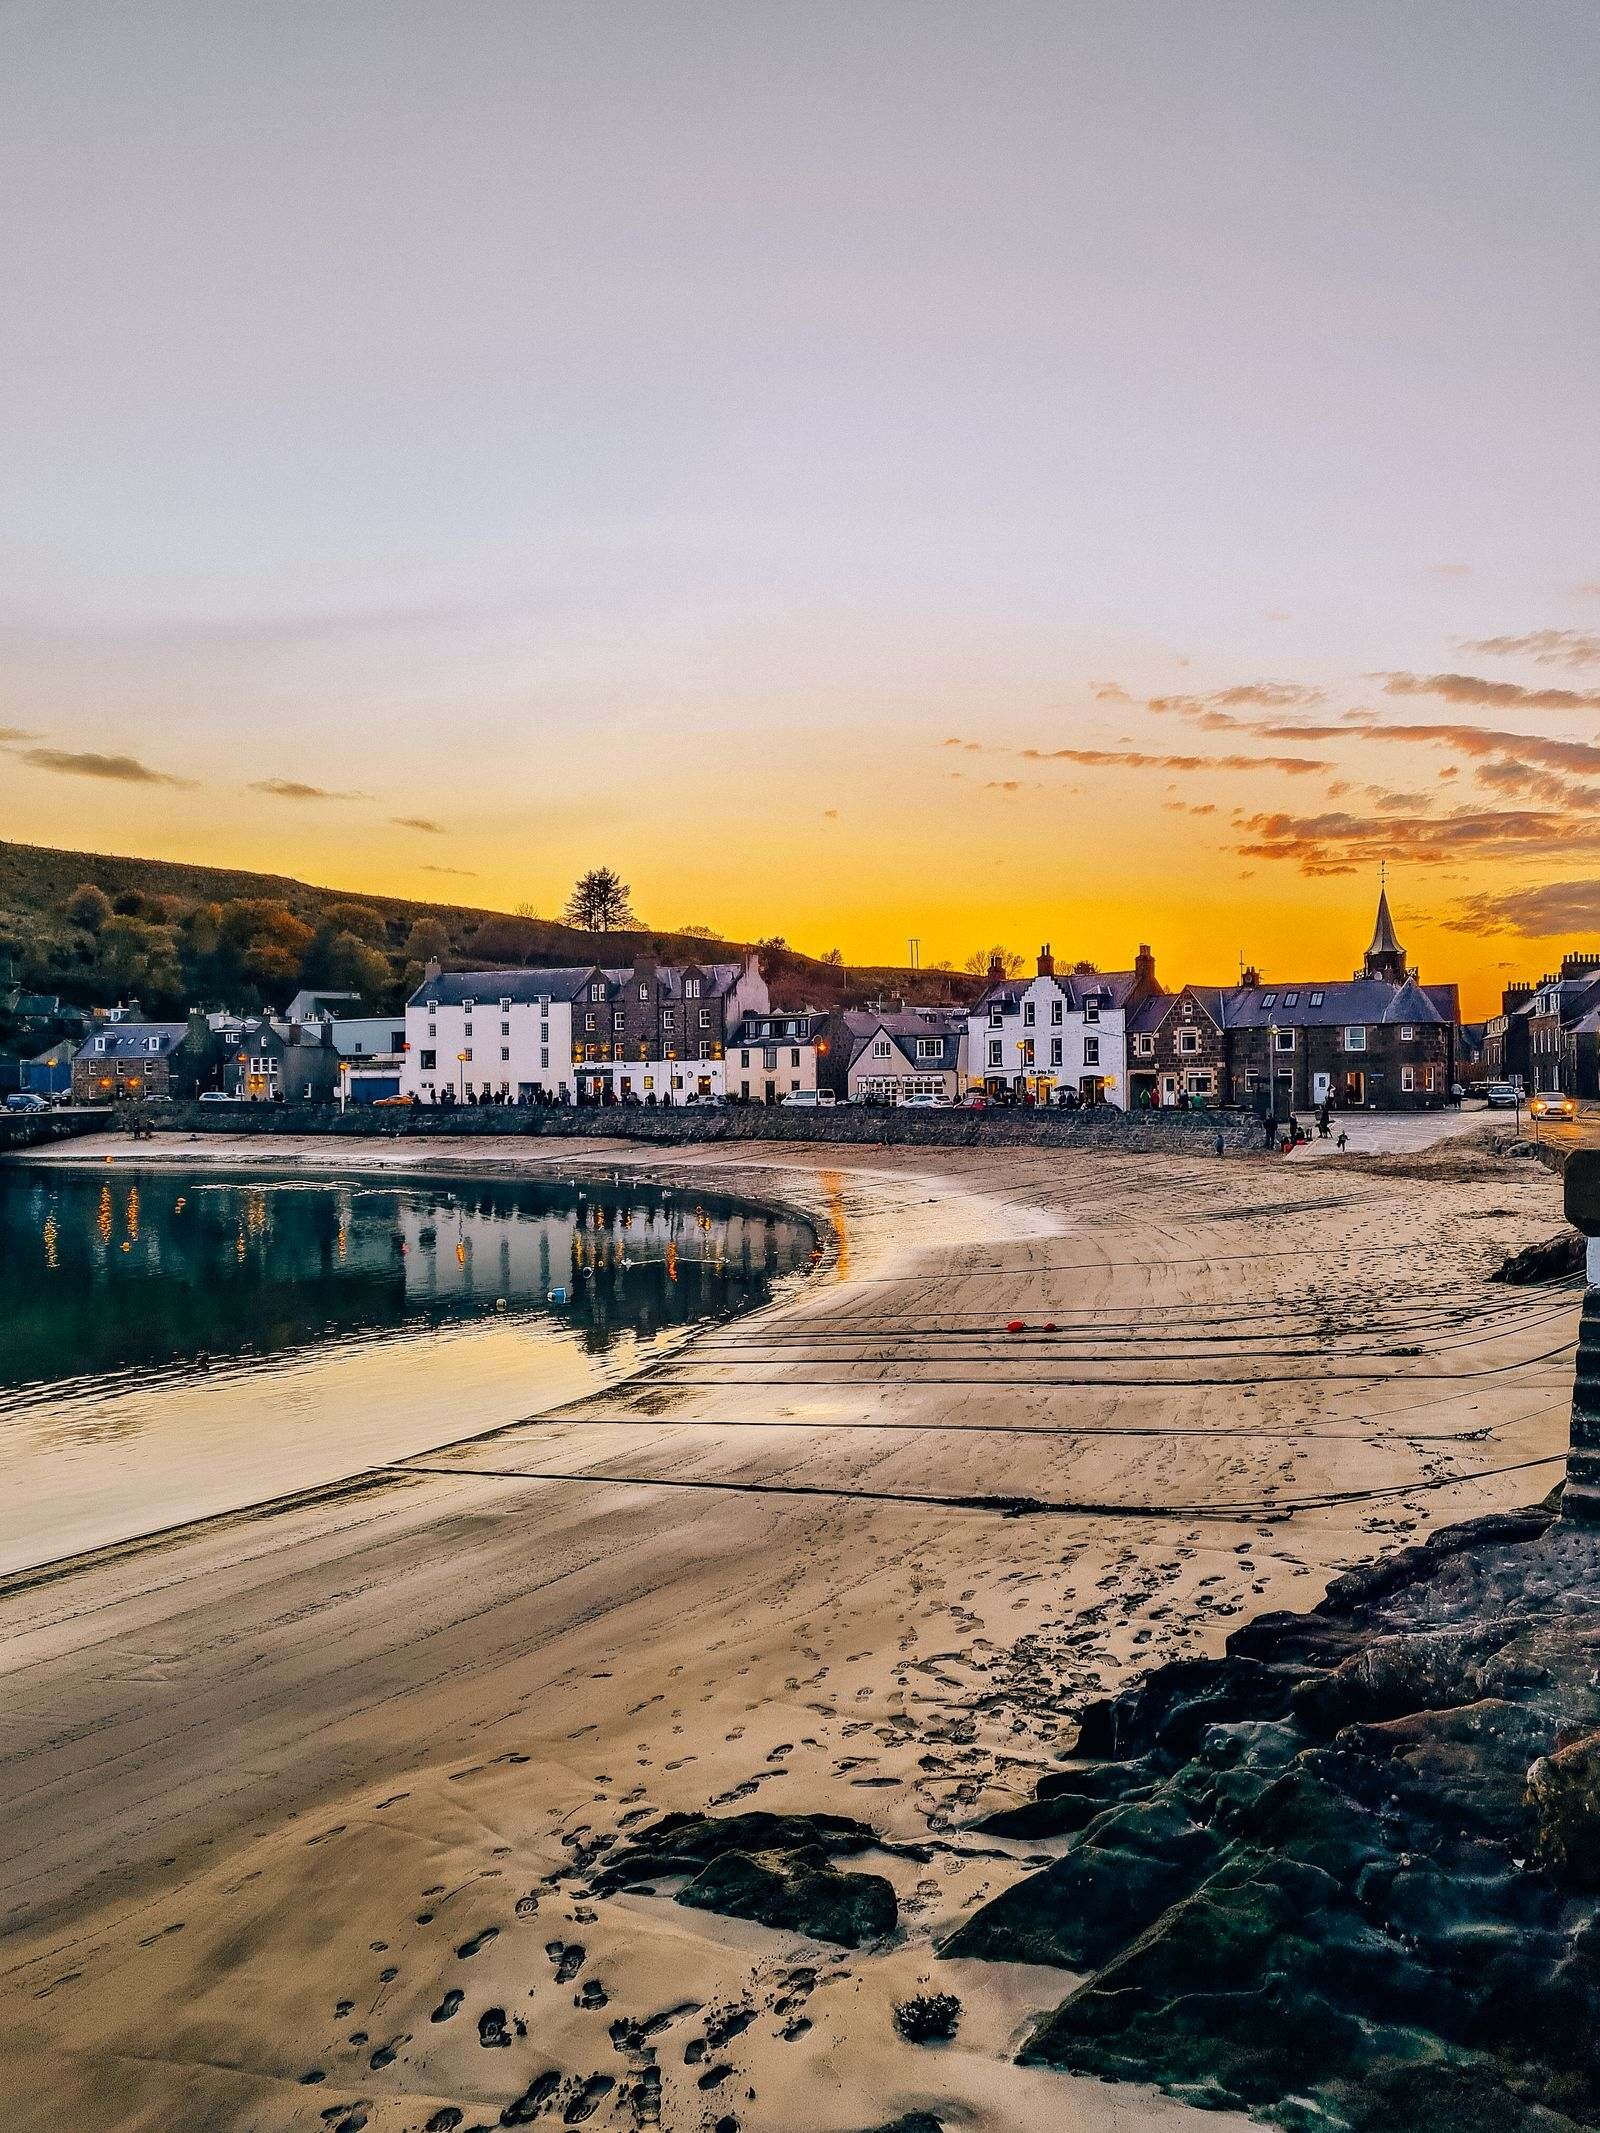 The beach and calm sea in Stonehaven harbour, Scotland at sunset with white cottages on the far side of the harbour